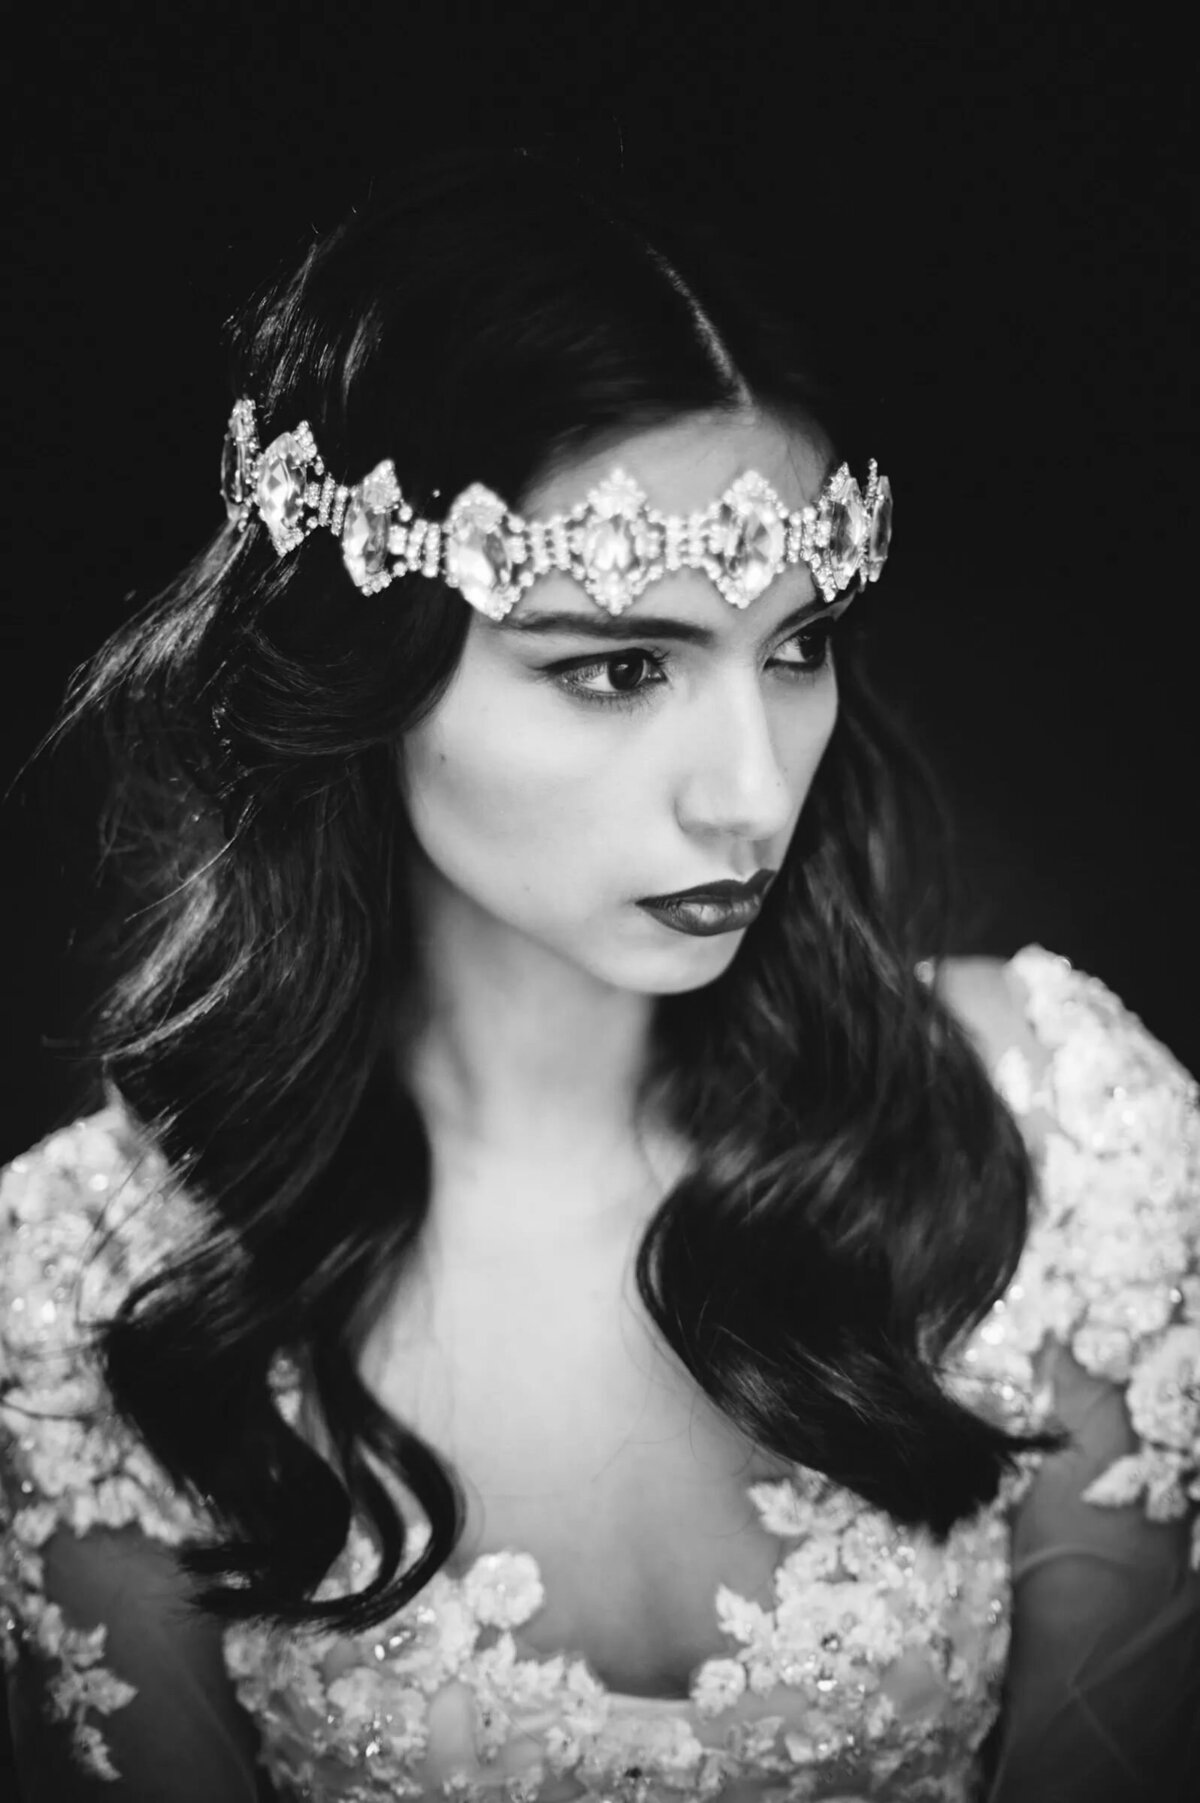 A close-up black and white portrait of a bride, her gaze intense and focused, adorned with a detailed headpiece and embellished dress.